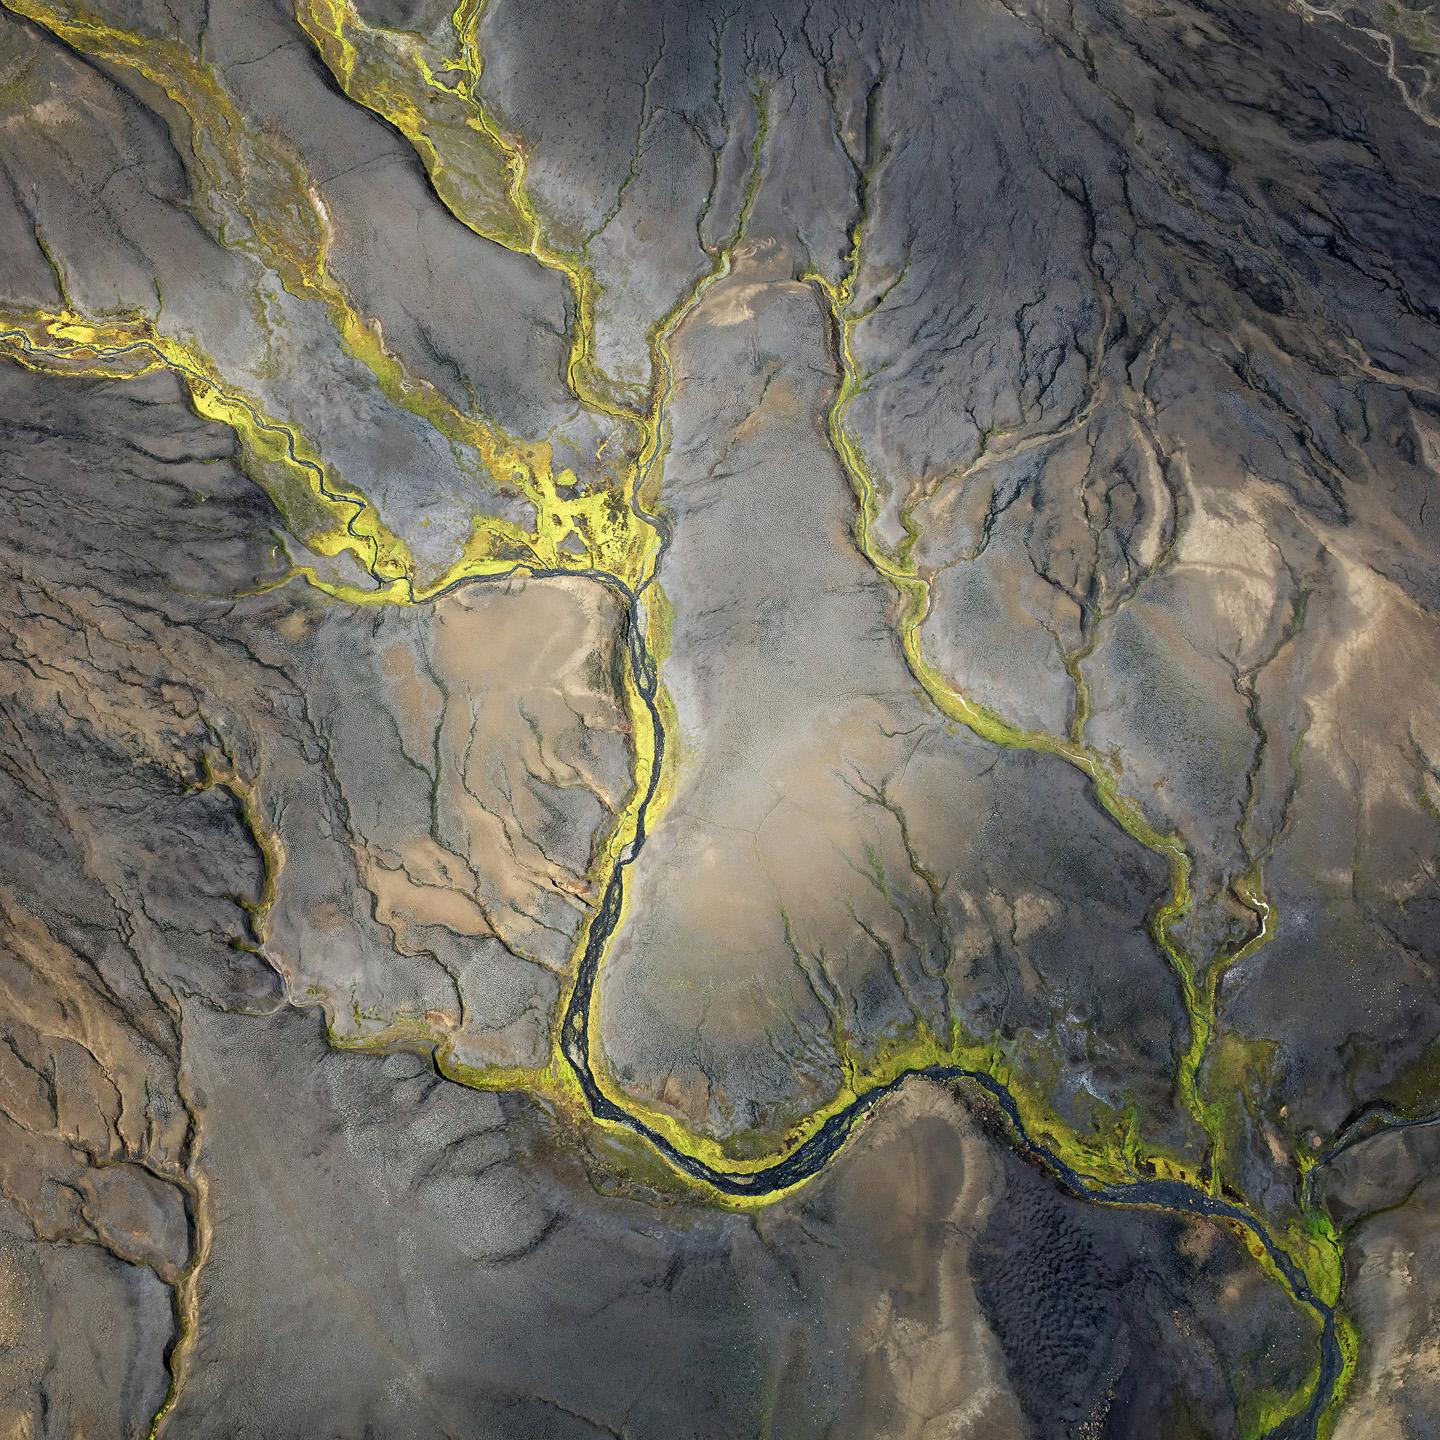 This is a new series of photography of landscapes depicting Earth and its land forms taken from the air. This series of aerial photography captures Earth's beauty taken in remote lands around our world, mostly untouched by mankind. The colors are